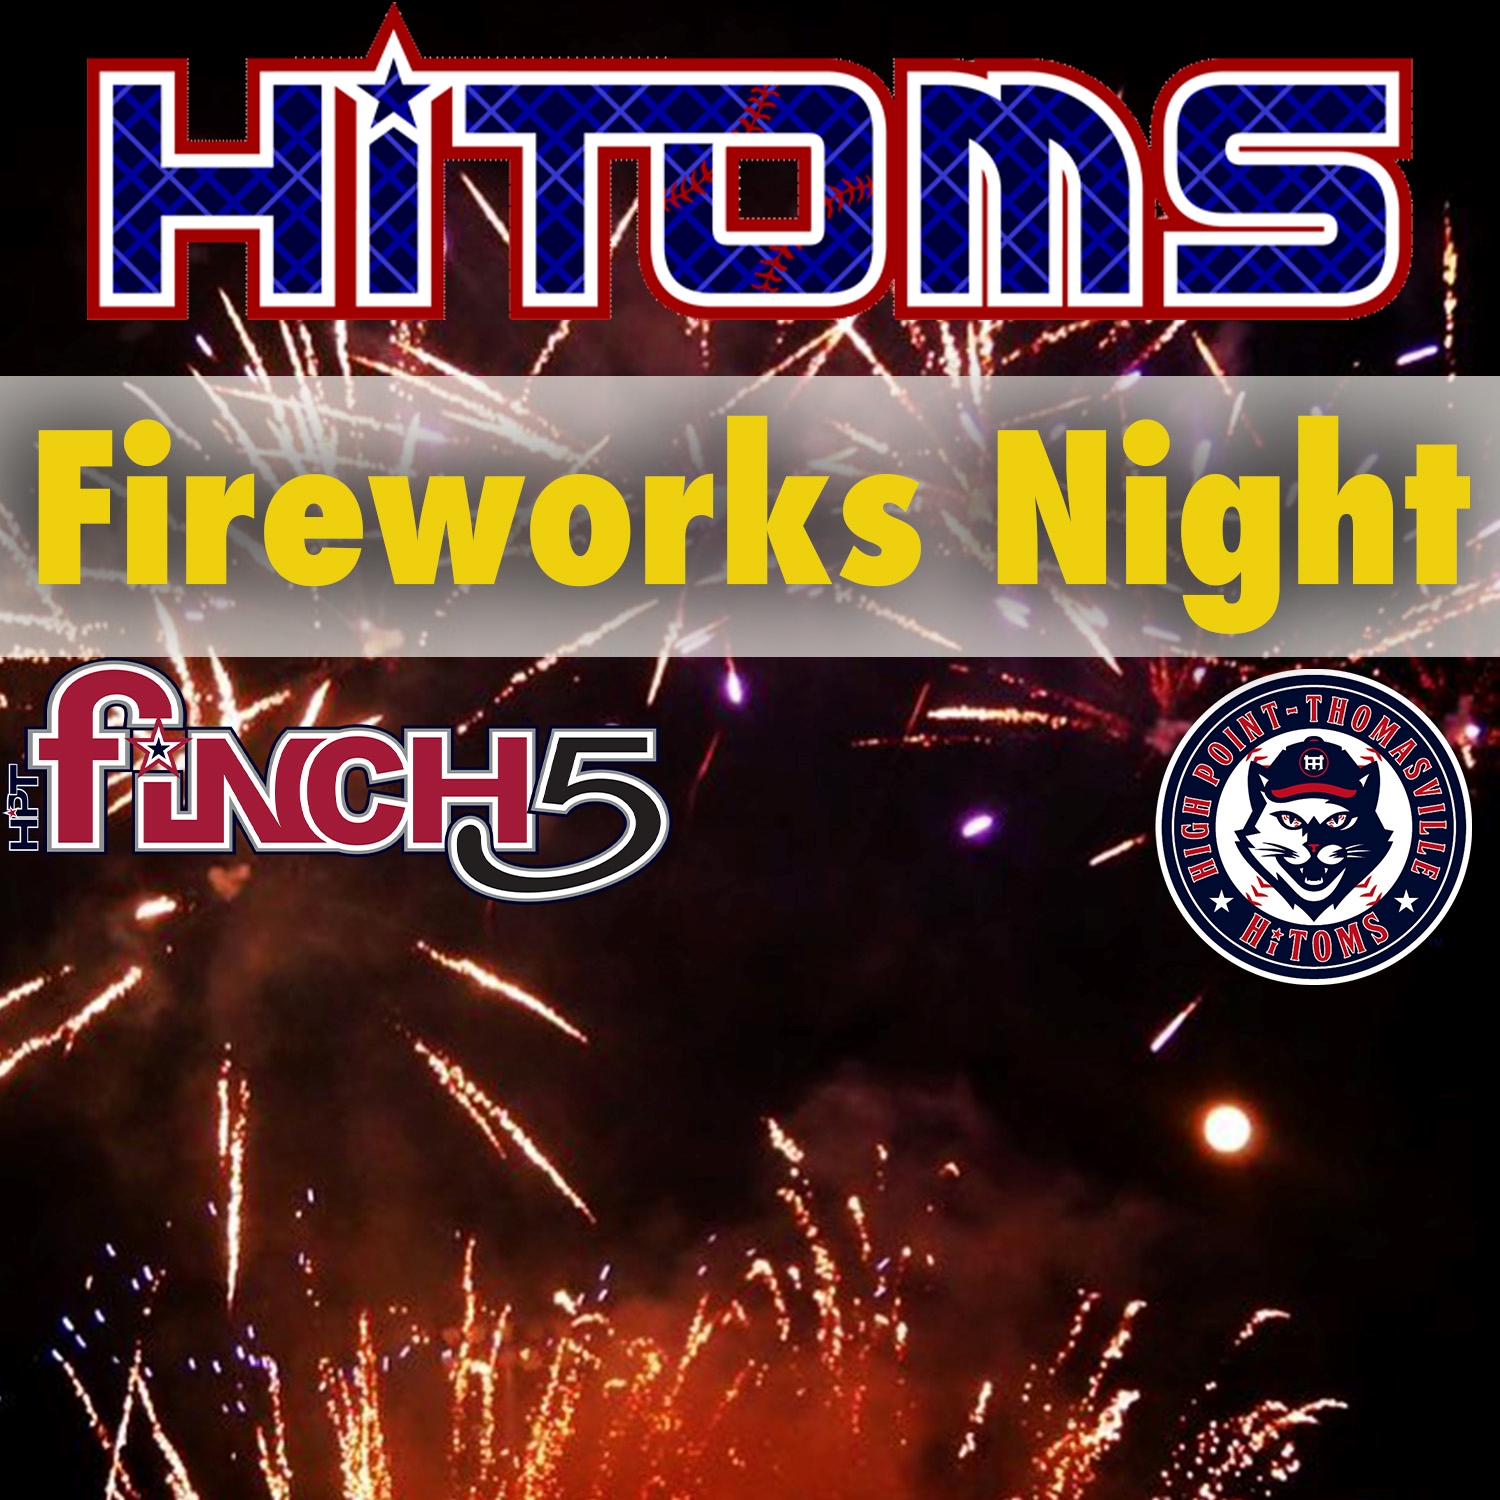 Join us on June 10th for Friday Night Fireworks!